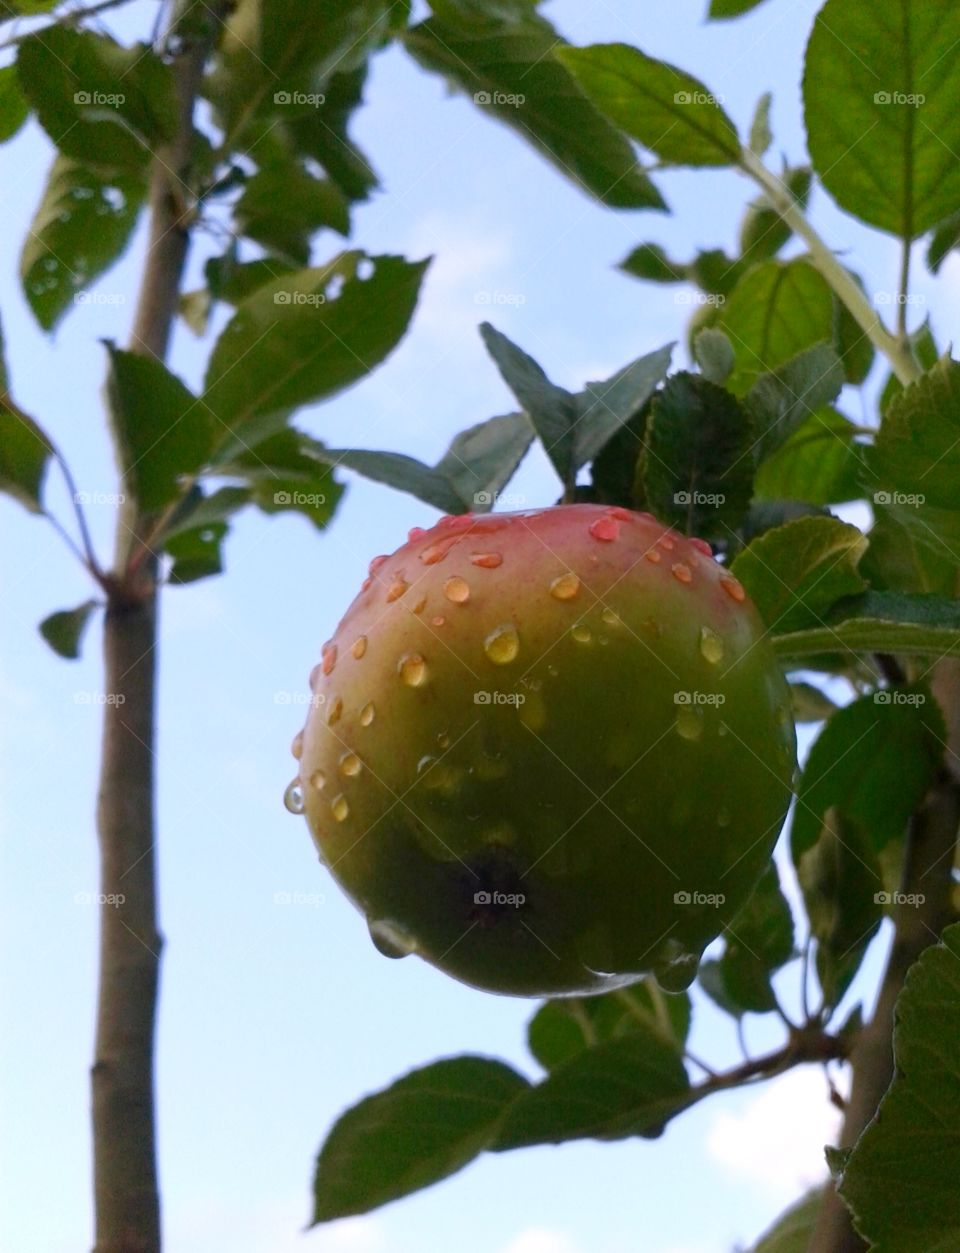 An apple growing on a tree, after the rain.